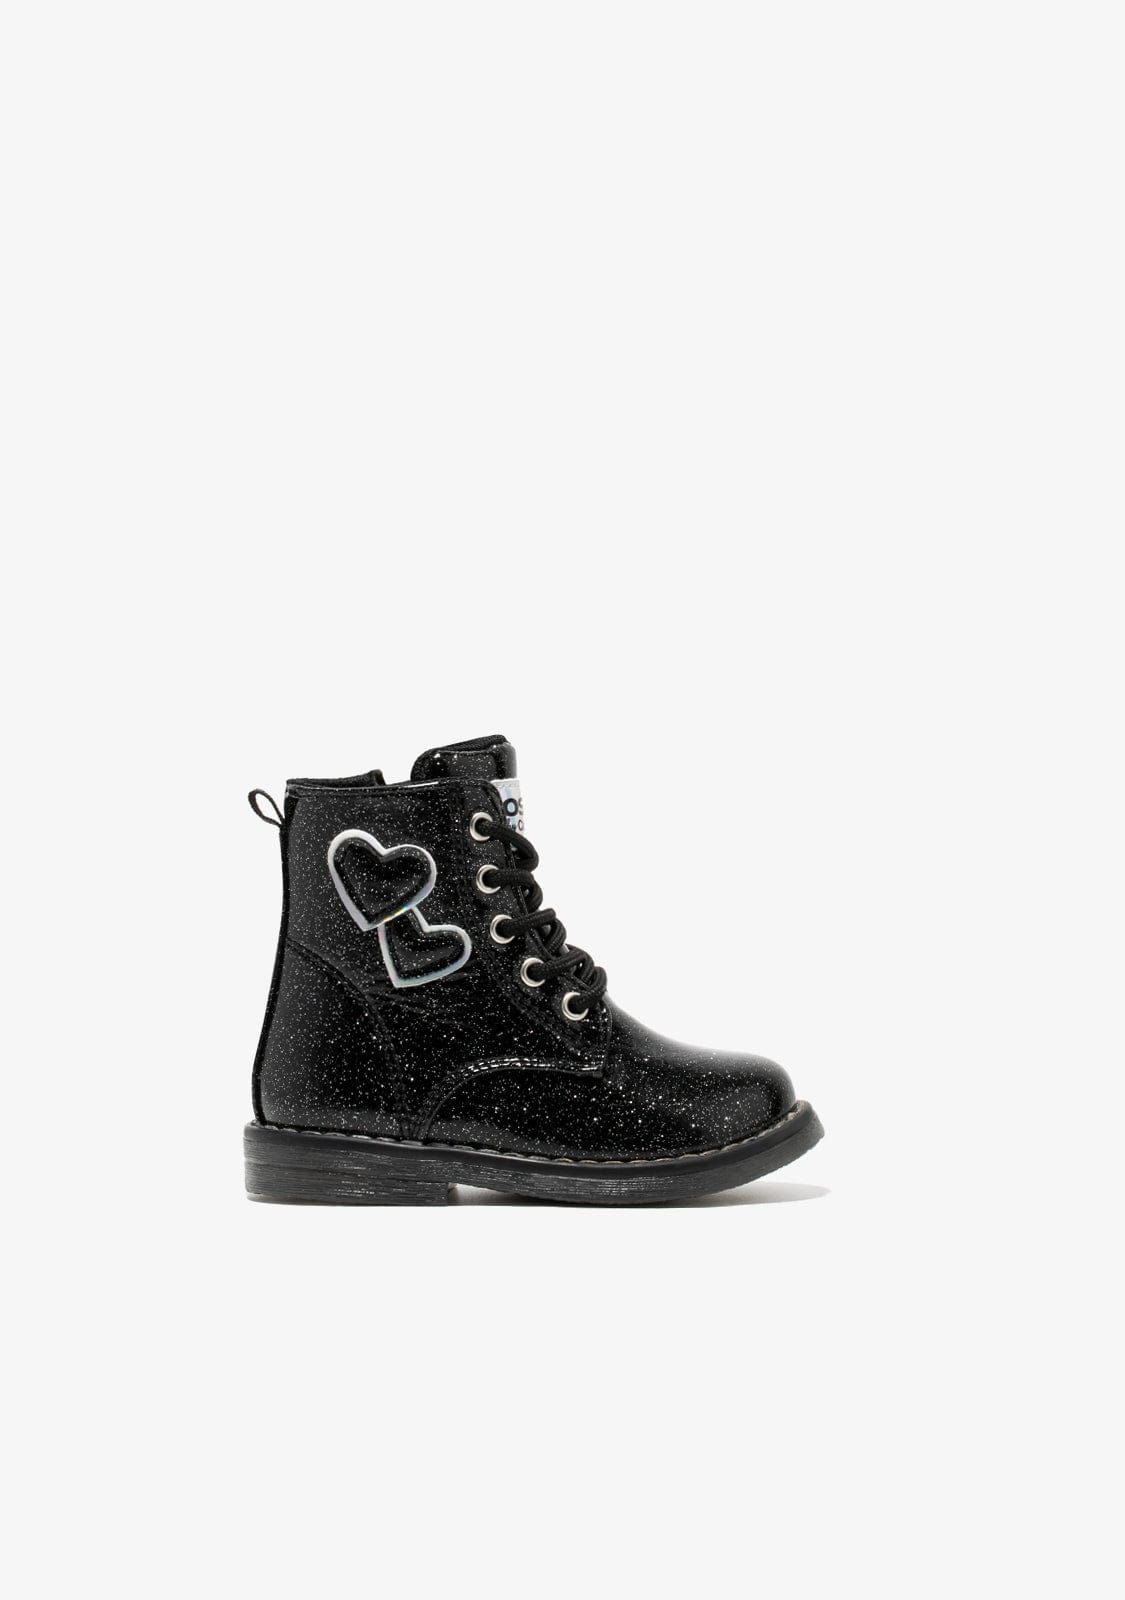 OSITO Shoes Baby's Black Hearts Cord Ankle Boots